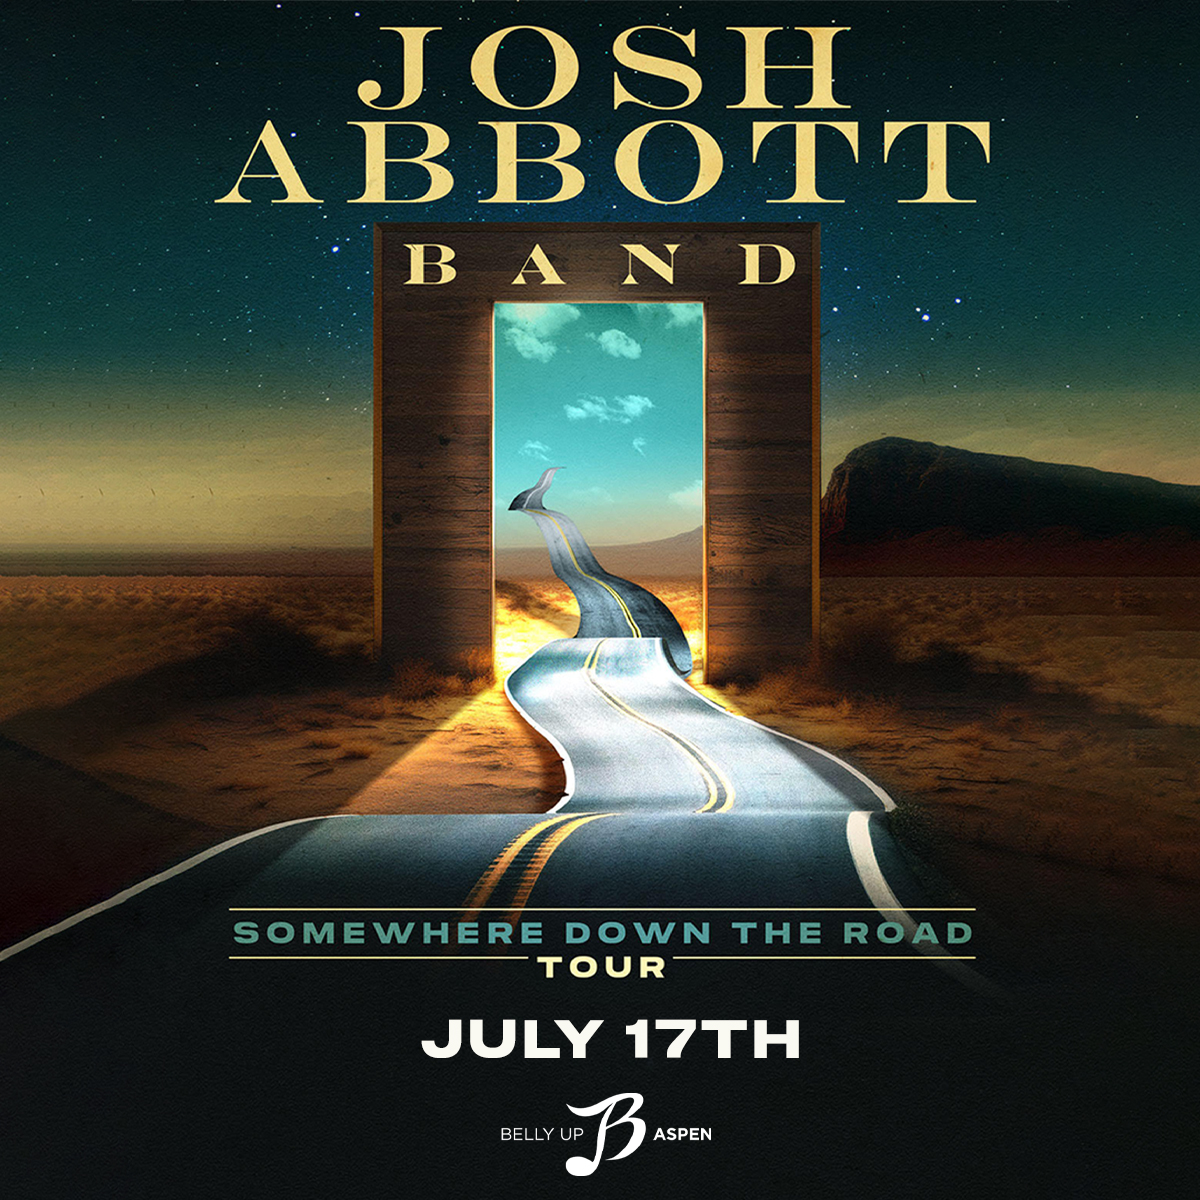 Texas Red Dirt icon Josh Abbott Band debuts 7/17! Presale starts Thu, 4/18 @ 10am MT. Sign up by 8:30am MT 4/18 to receive the presale code: bit.ly/3MSARpt